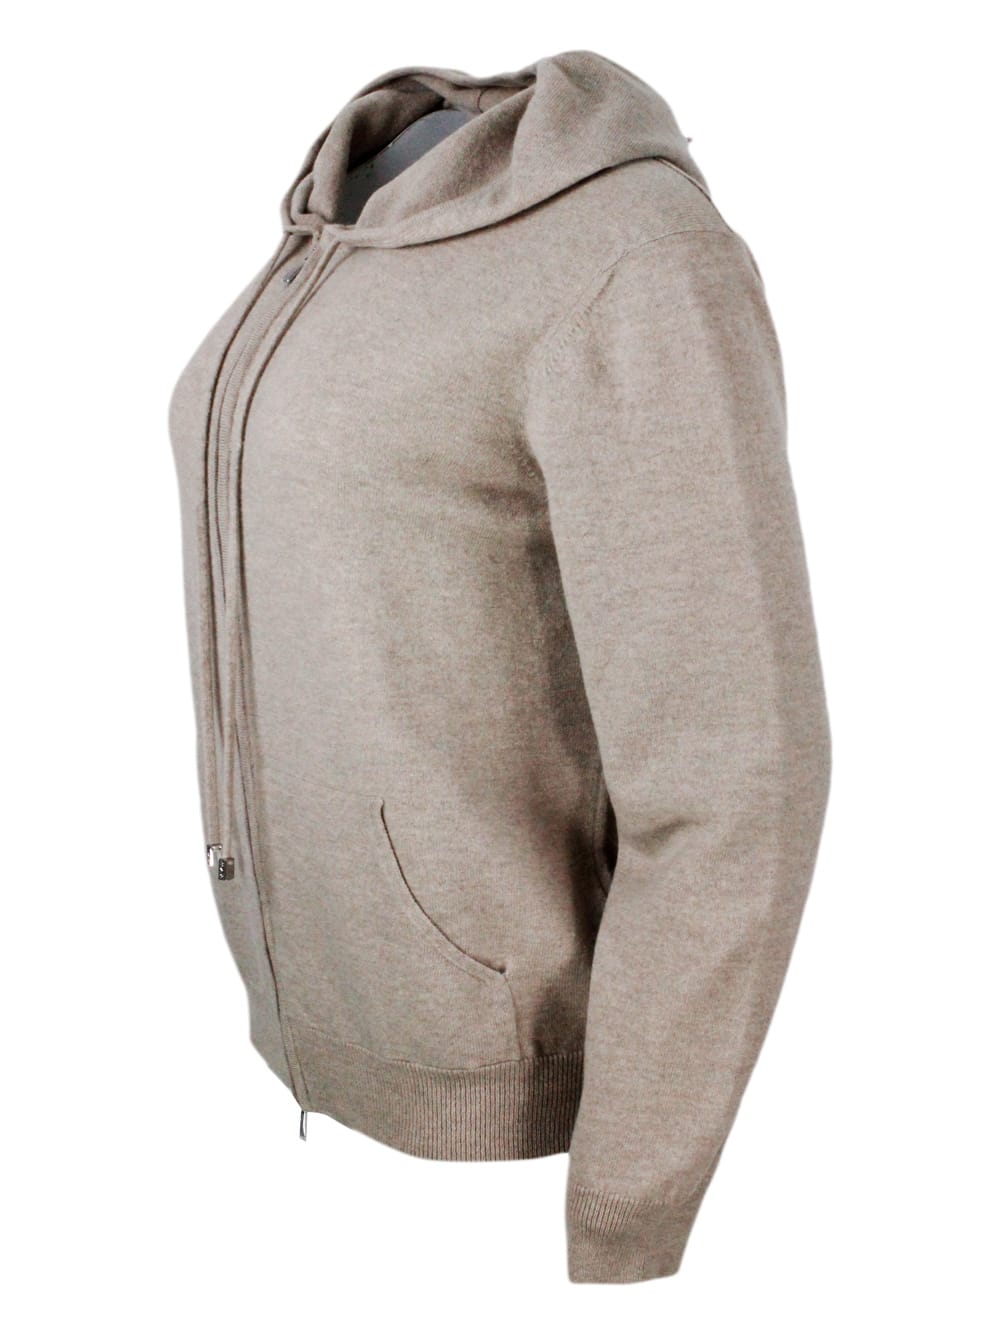 Shop Malo Sweatshirt Style Sweater In Pure And Soft Cashmere With Hood And Zip Closure In Beige